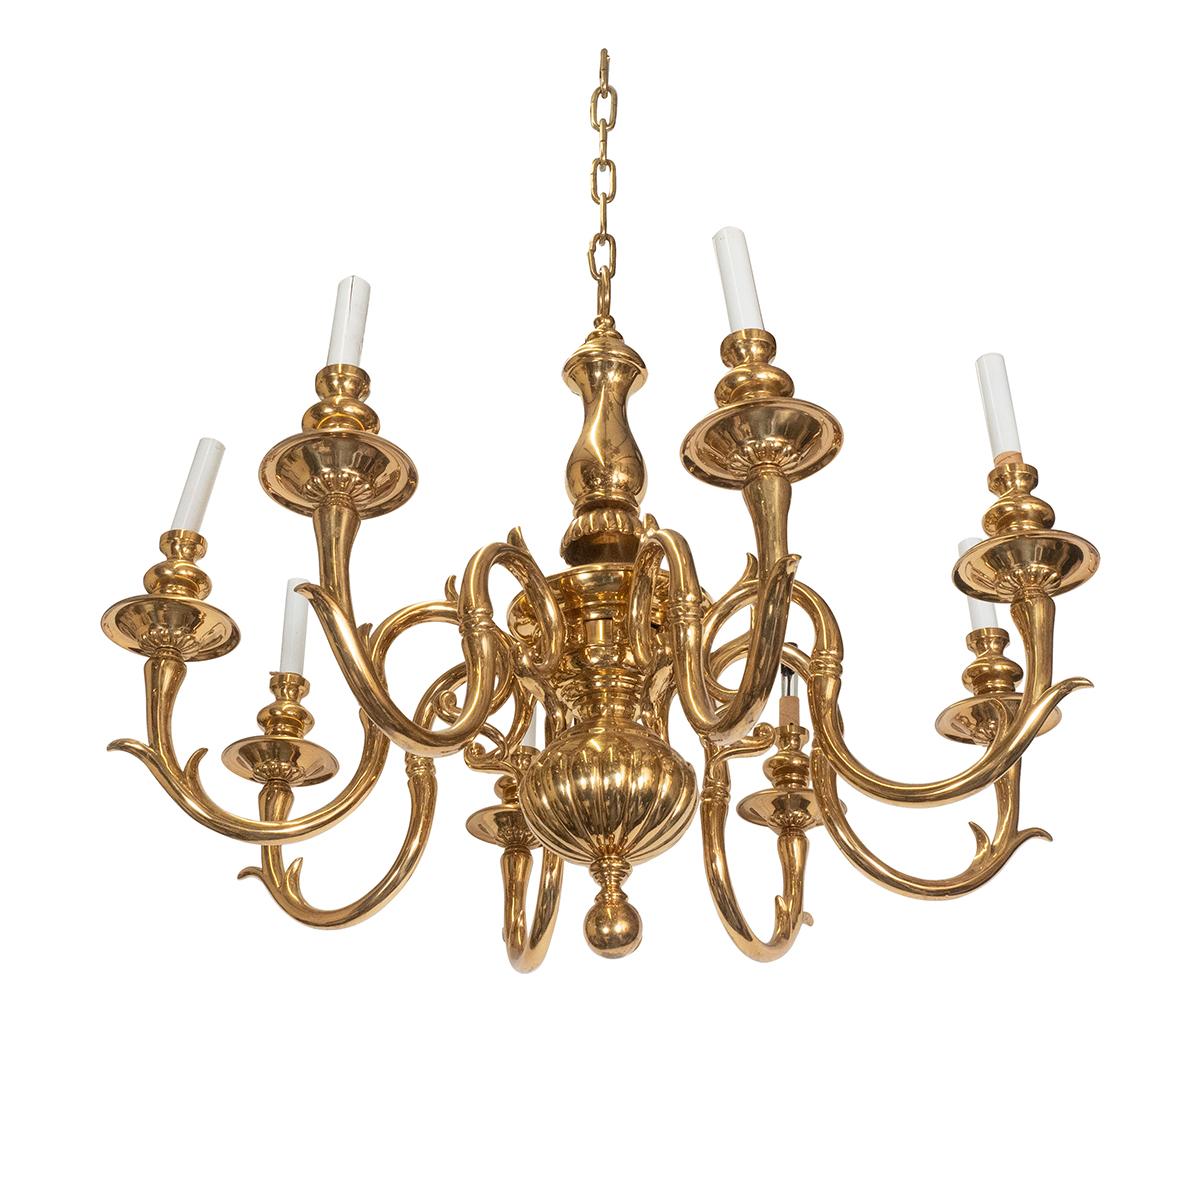 Cast brass curvilinear chandelier with tendril motif arms.